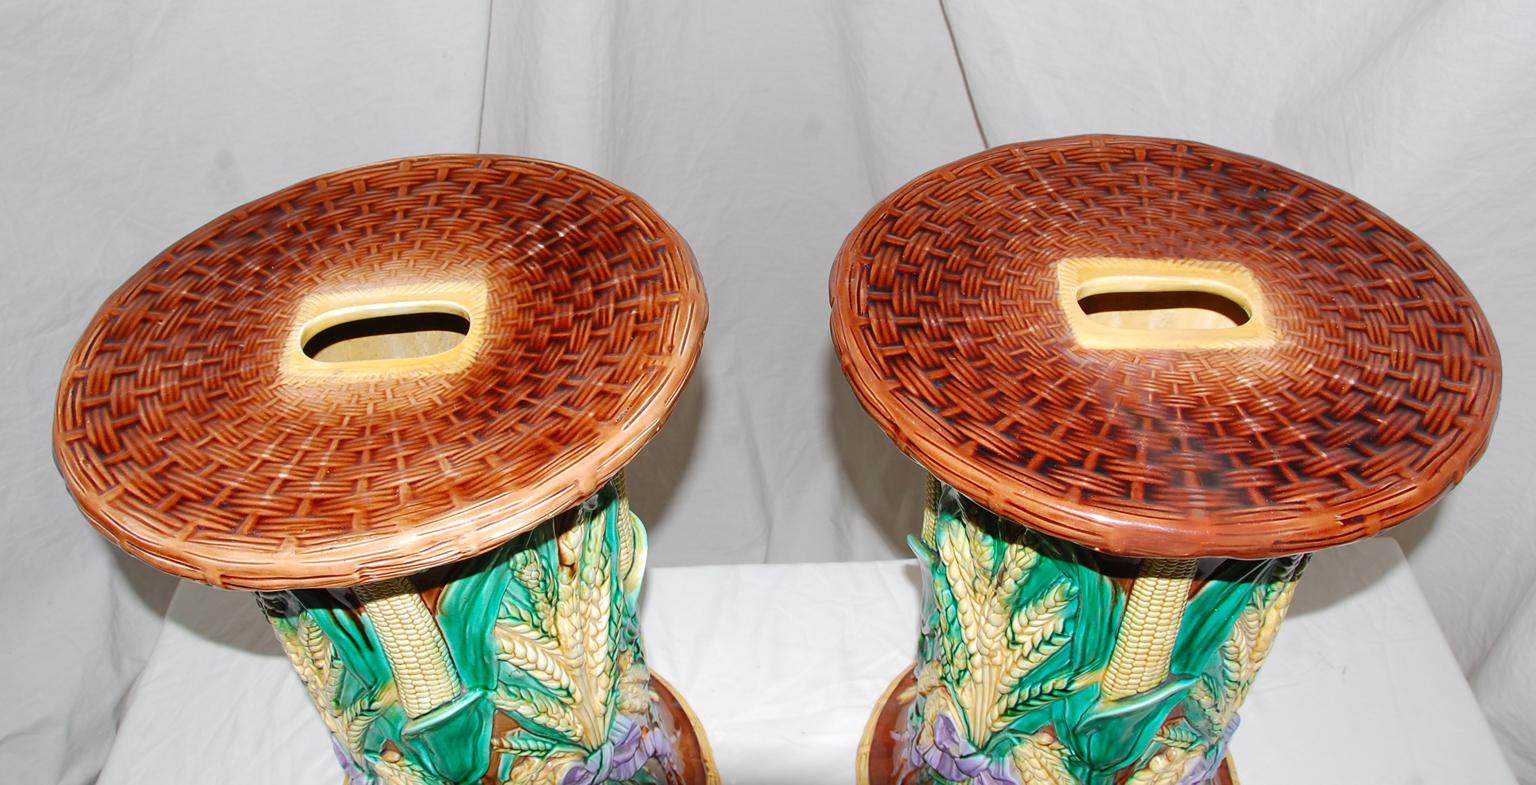 English Pair of 19th Century Majolica Garden Seats by John Adams In Good Condition For Sale In Wells, ME